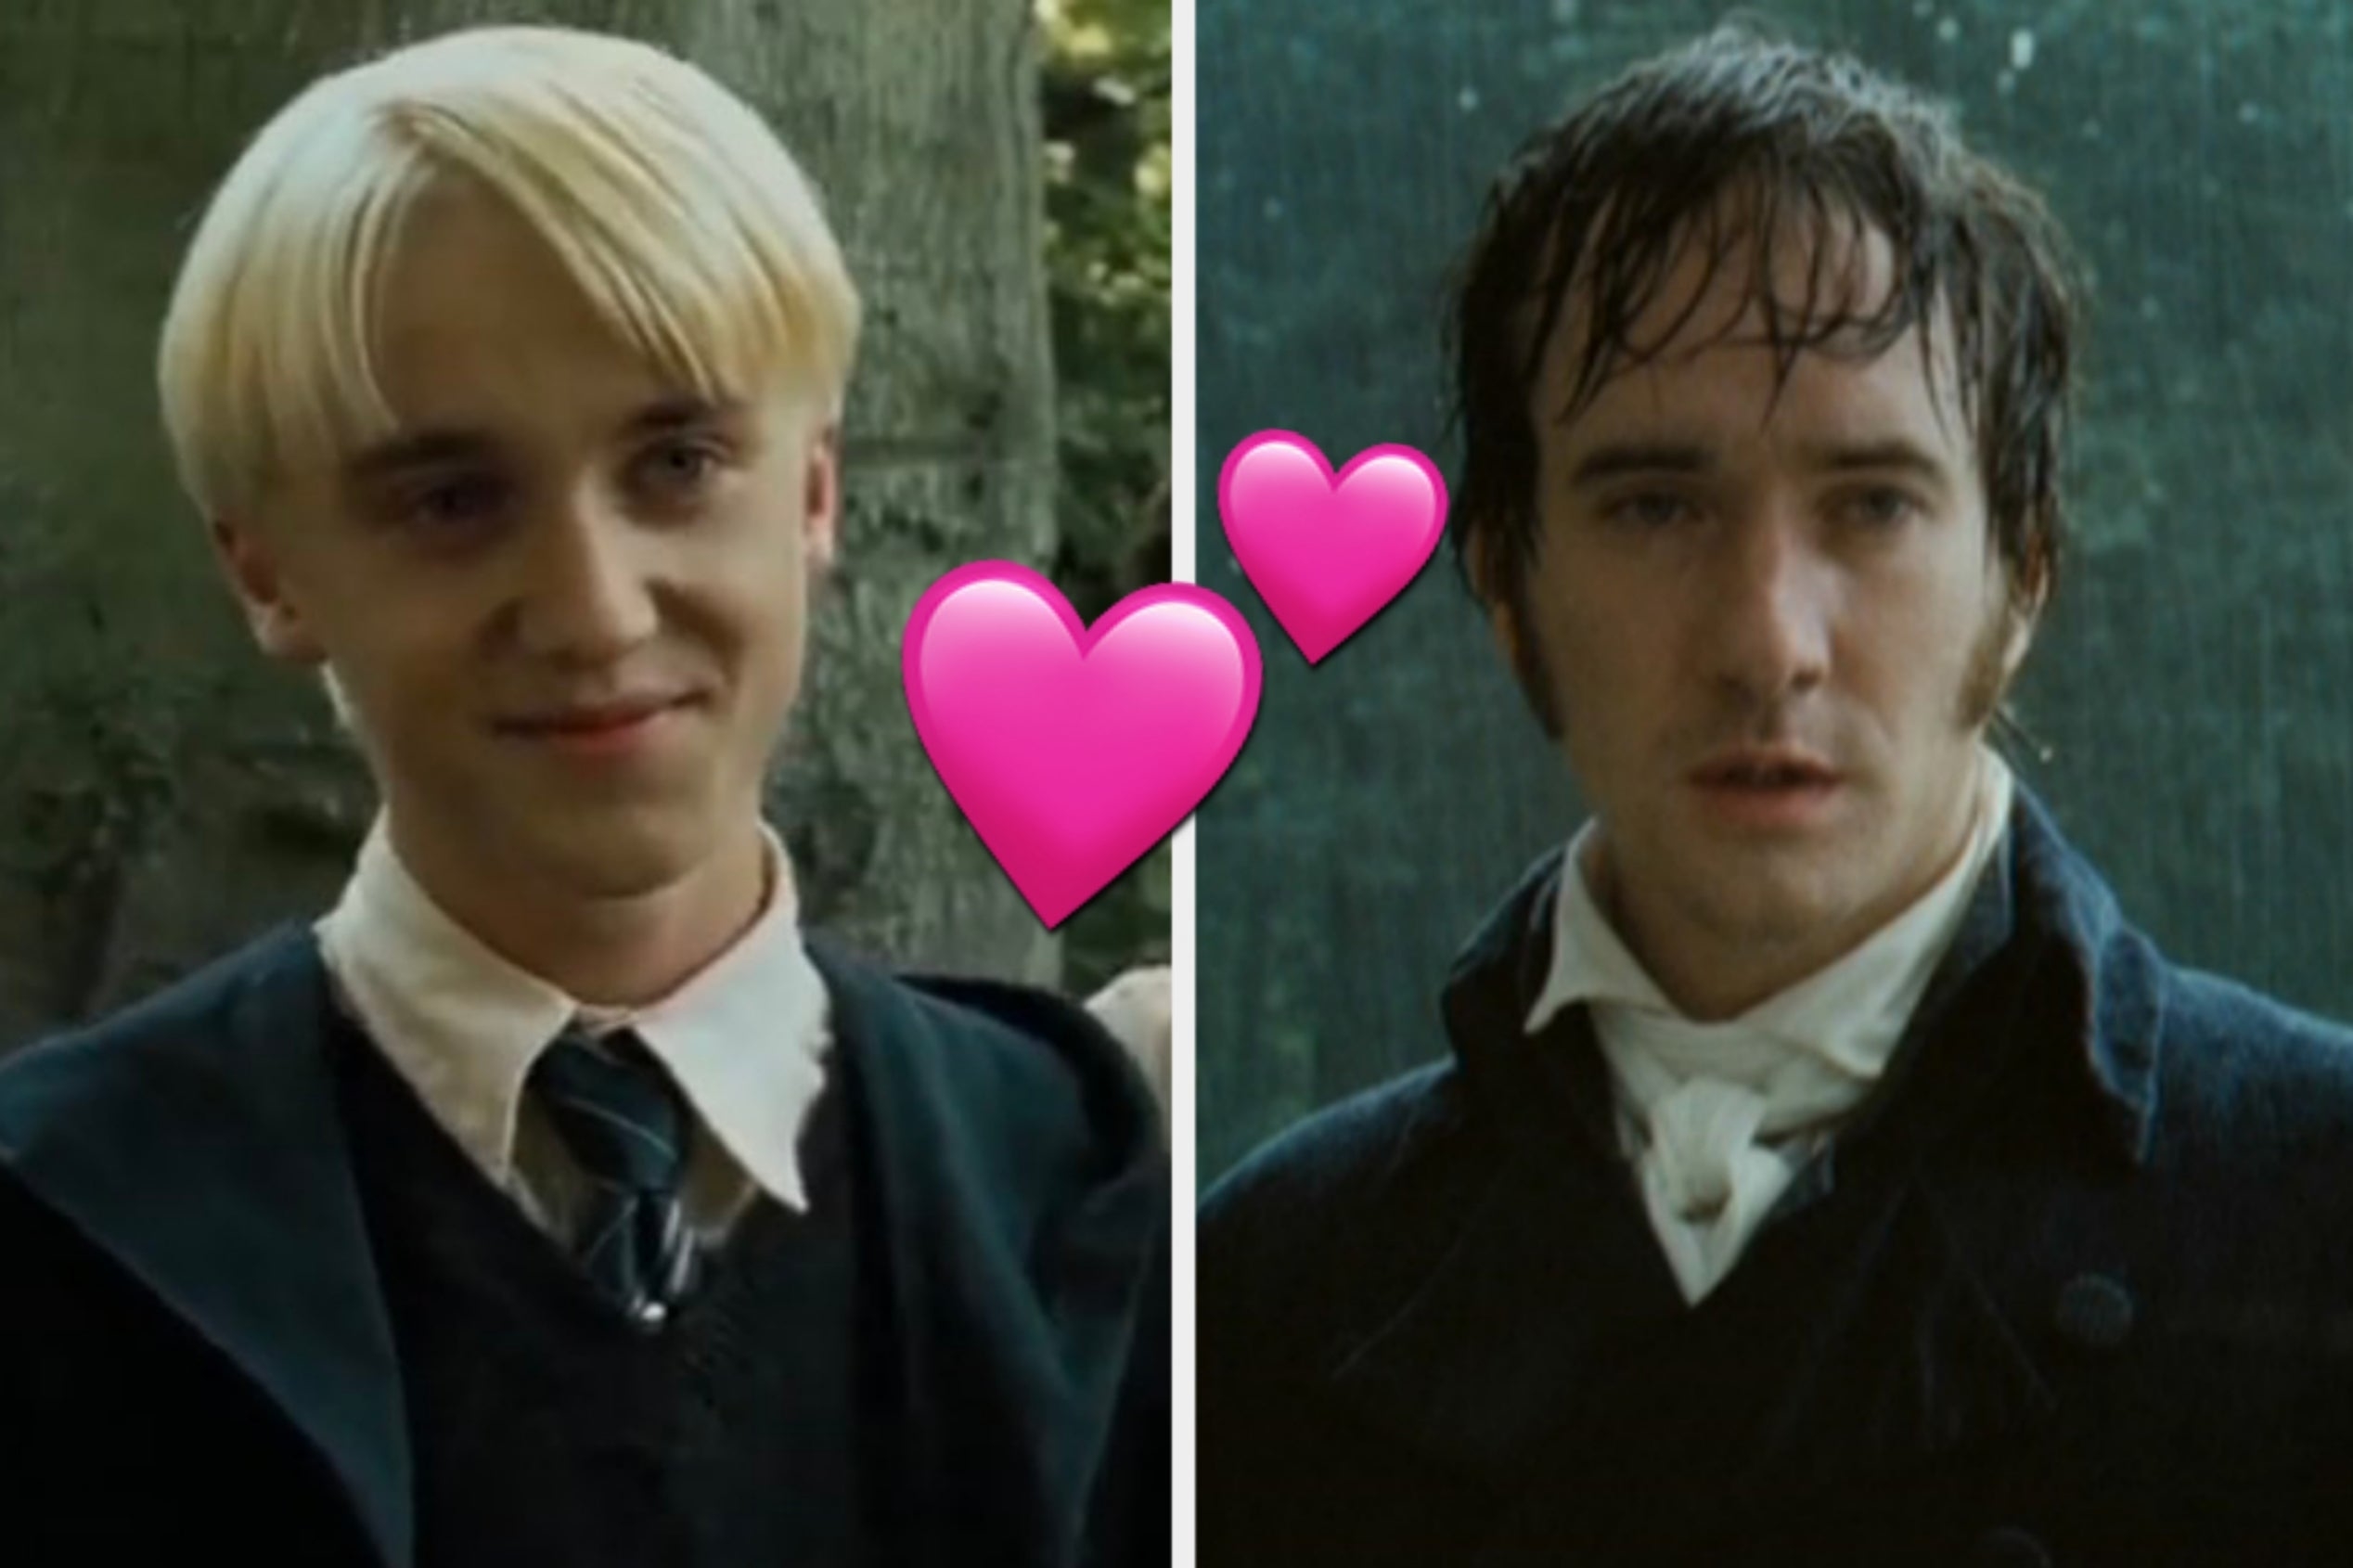 On the left, Draco Malfoy from Harry Potter smirking, and on the right. Matthew Macfadyen standing out in the rain as Mr. Darcy in Pride and Prejudice with two hearts placed in the middle of the two images